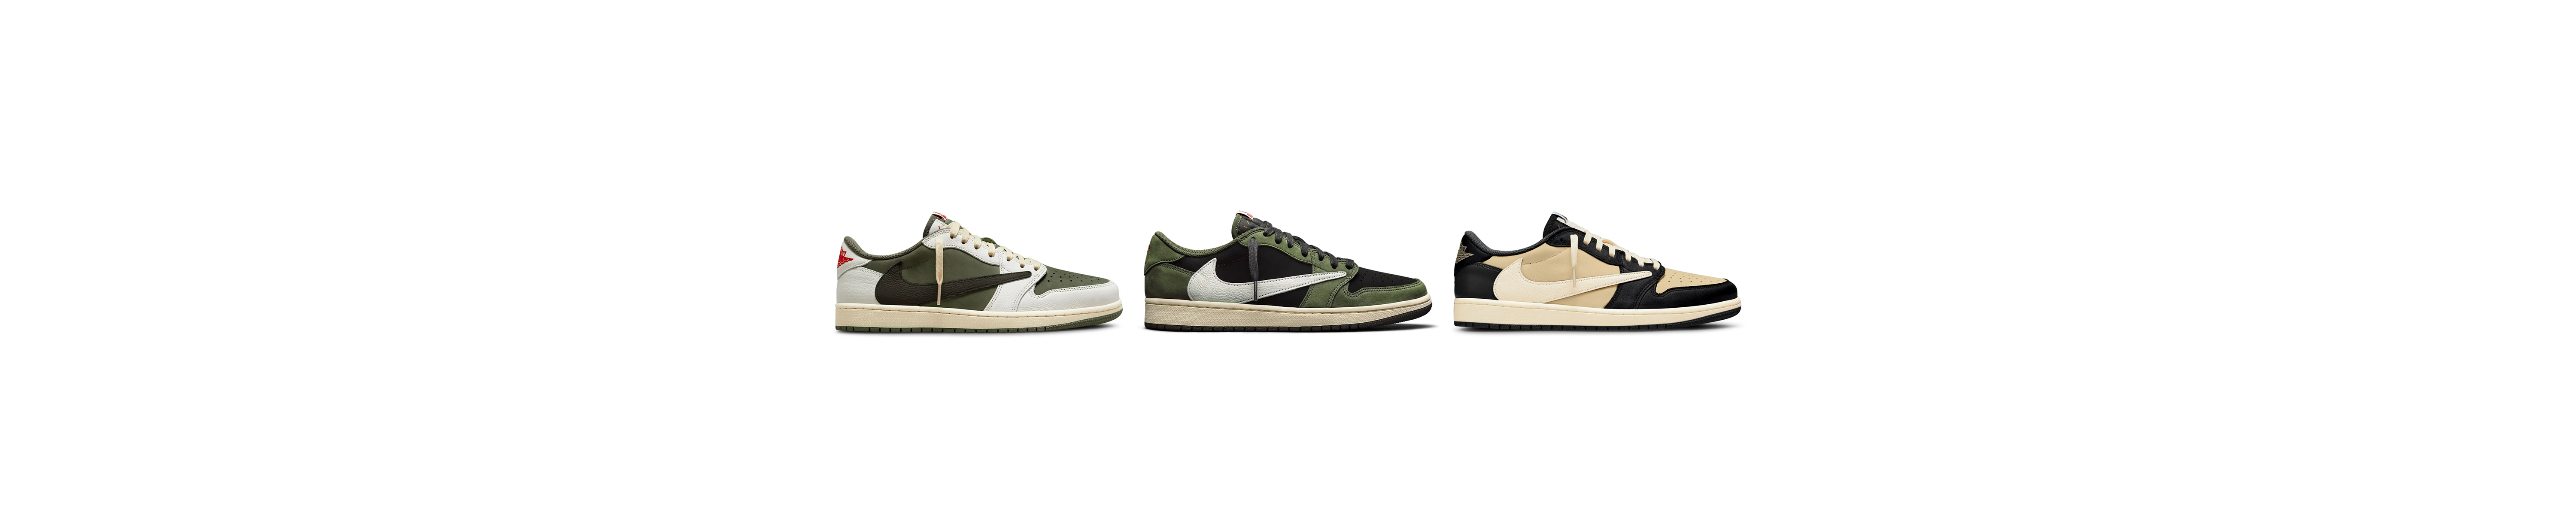 Every Travis Scott x Air Jordan 1 Low Expected to Release Soon